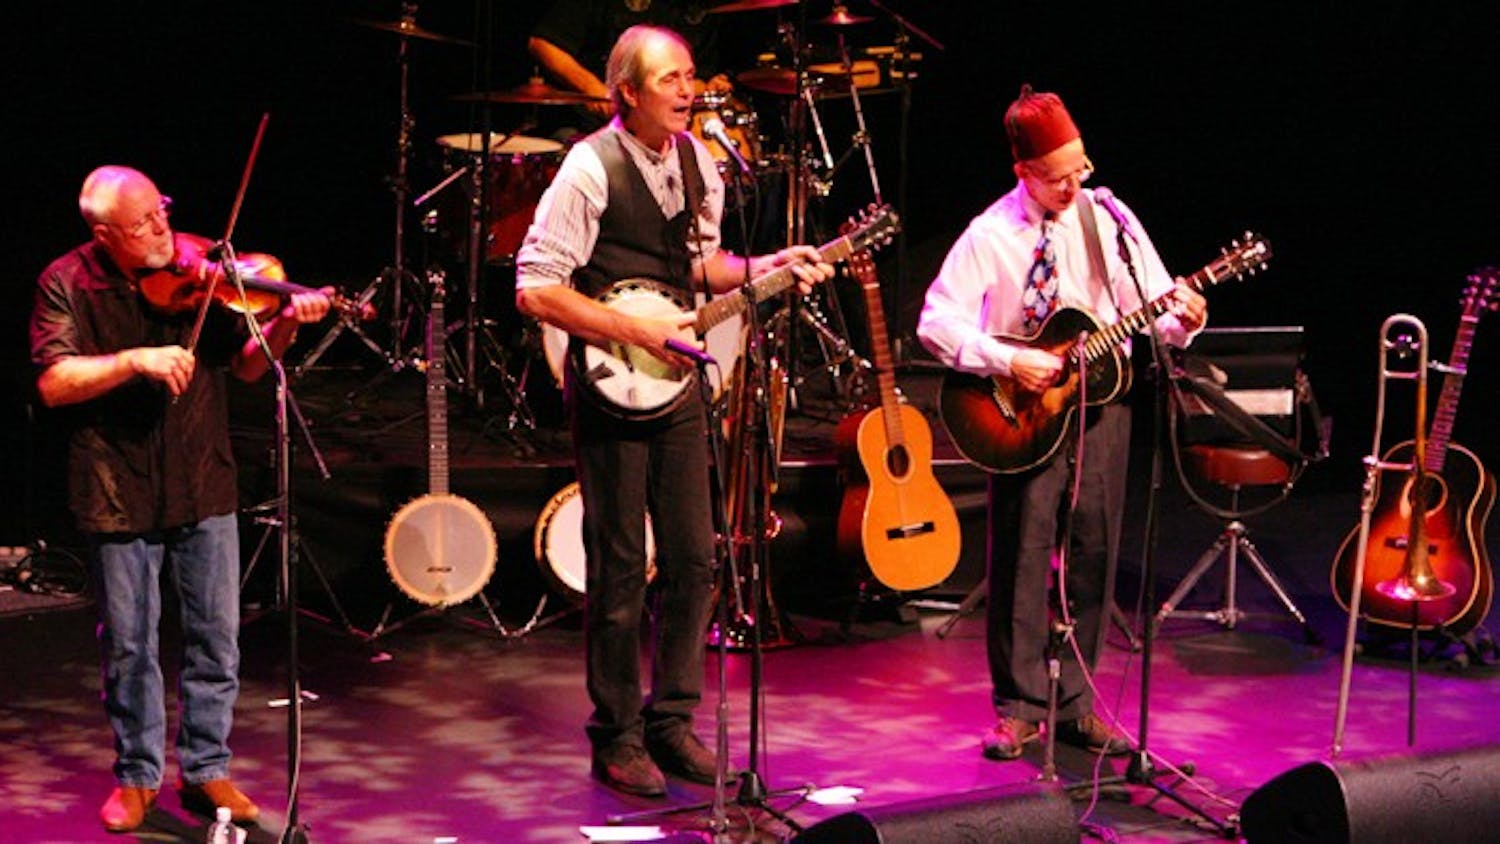 The Red Clay Ramblers perform in the Beasley-Curtis Auditorium at Memorial Hall on Wednesday night. The band changed from the opening act to the main event when it was announced that Earl Scruggs was too ill to play.